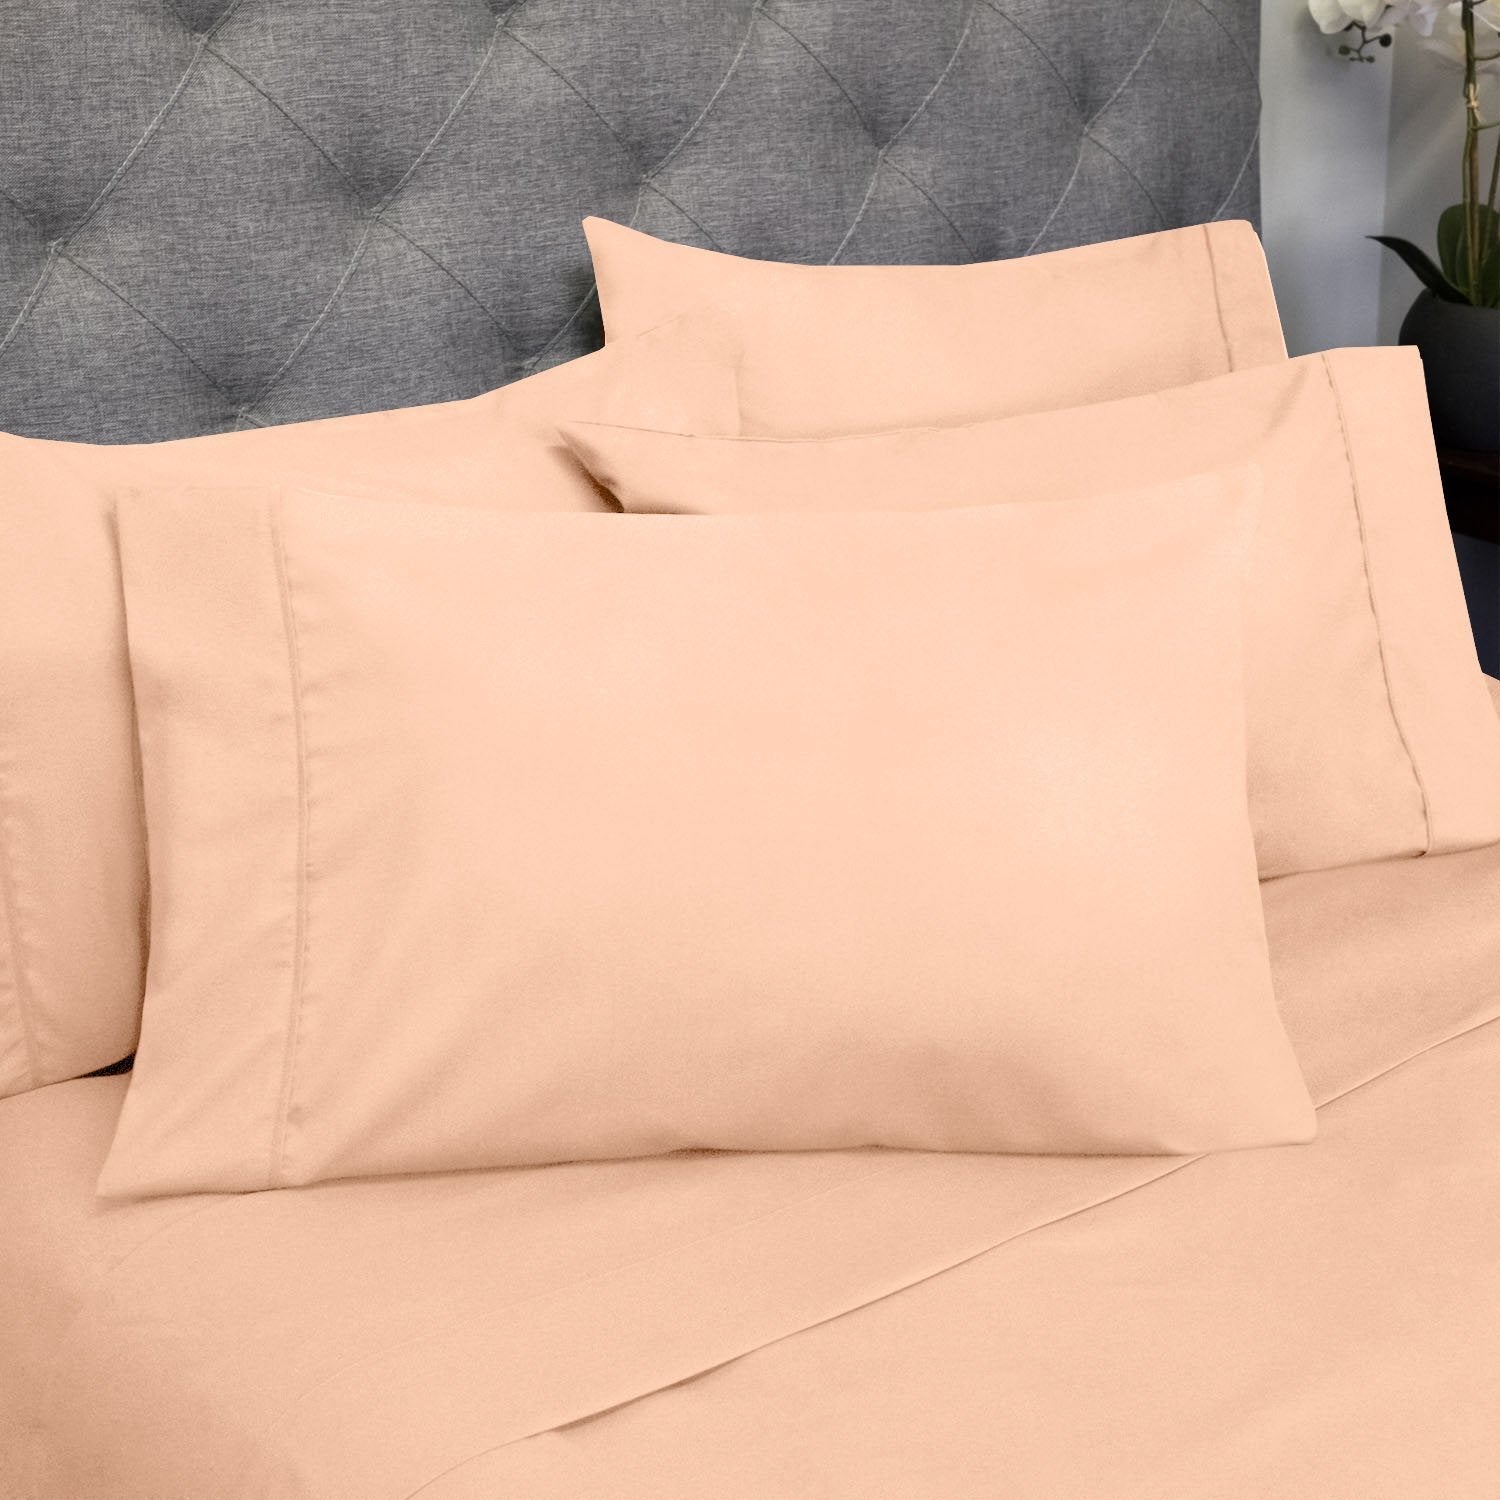 Deluxe 6-Piece Bed Sheet Set (Peach) - Pillowcases